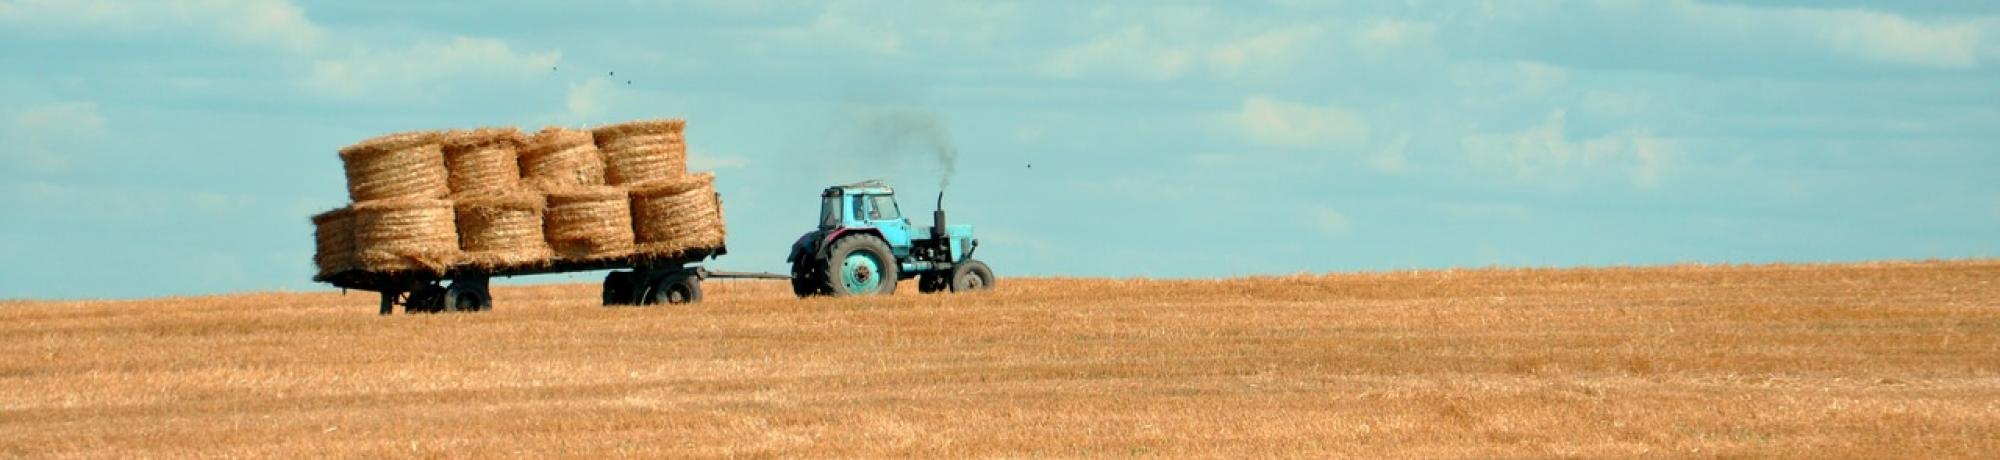 Tractor on field pulling hay